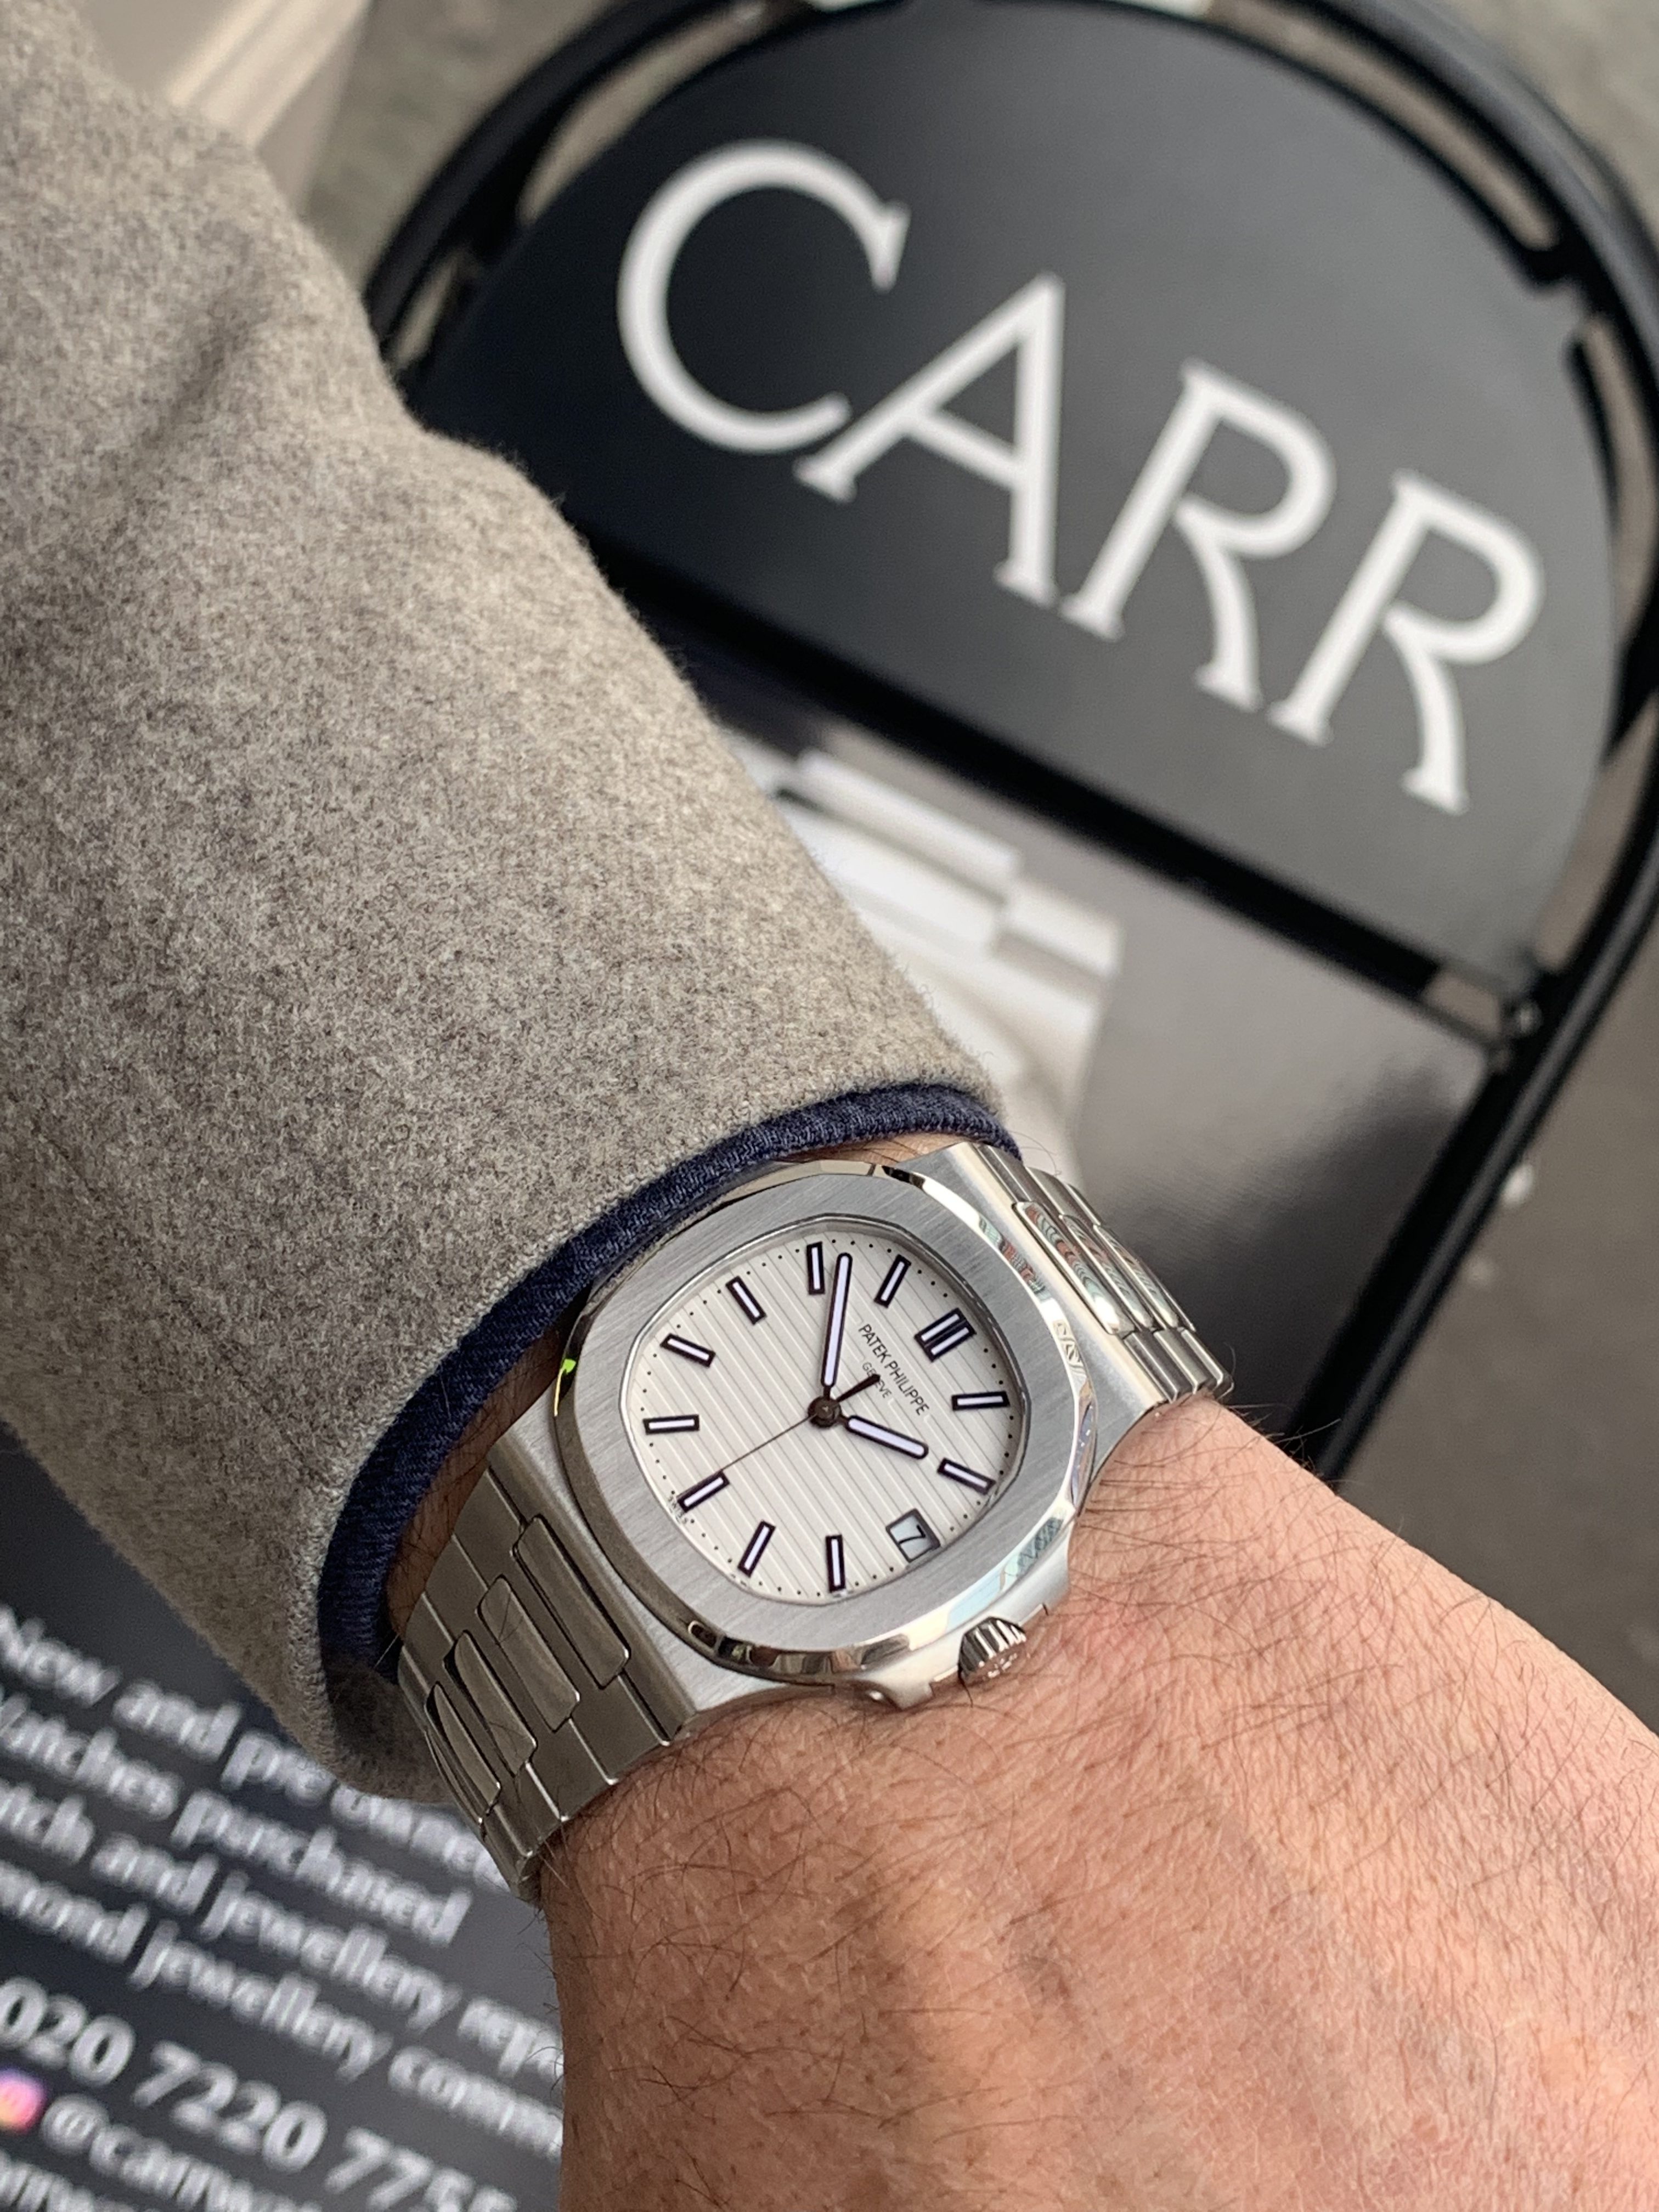 PATEK PHILIPPE NAUTILUS 5711 STAINLESS STEEL WHITE DIAL - Carr Watches